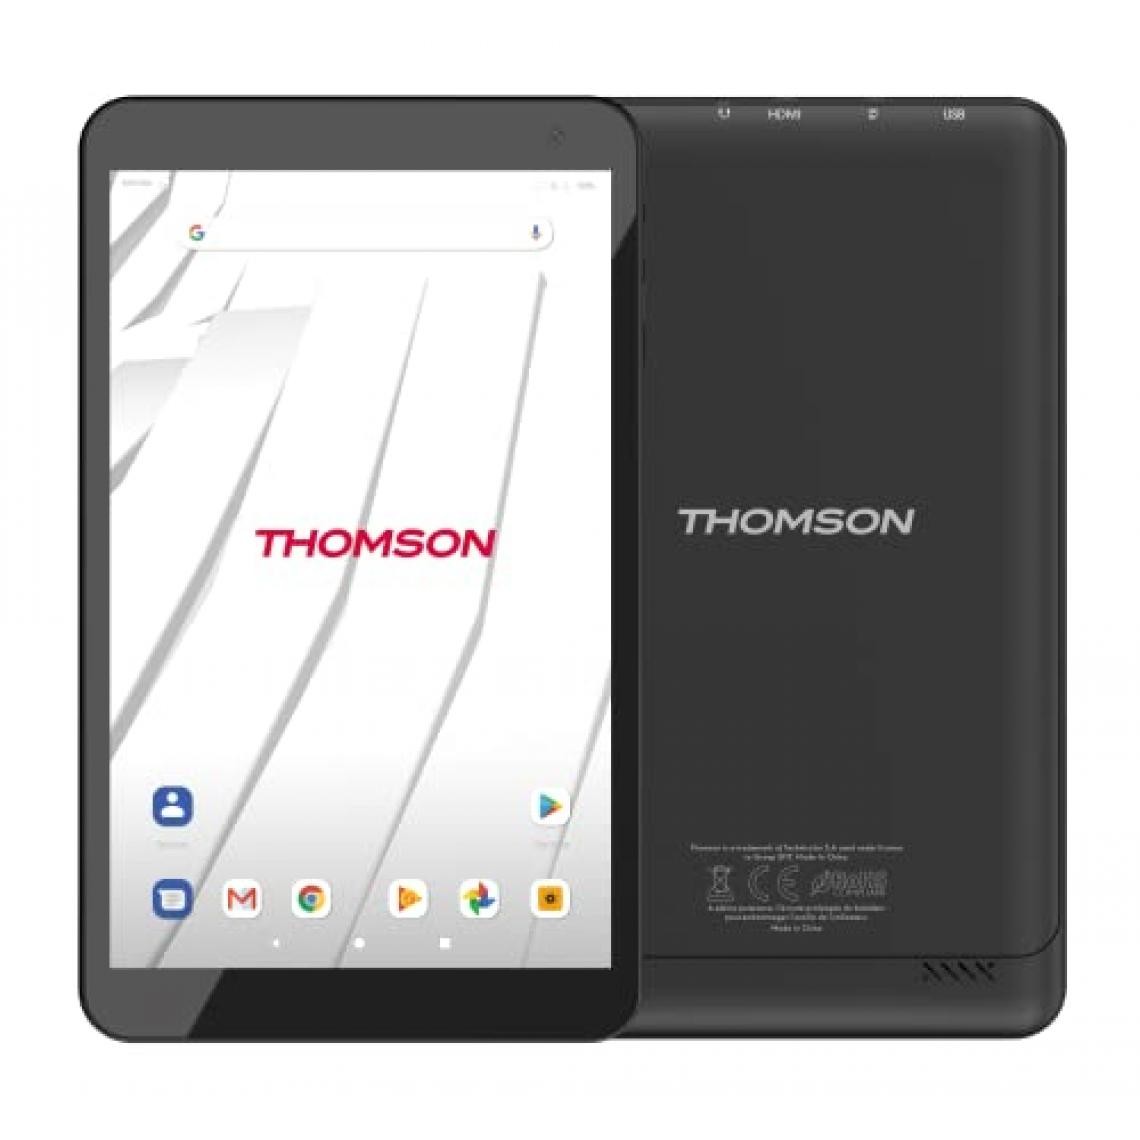 Thomson - Android Tablet RK3326 8p 2Go Android Tablet Quad Core Rockship RK3326 8p WXGA 2Go RAM 32Go eMMc Android 2Y - Tablette Android